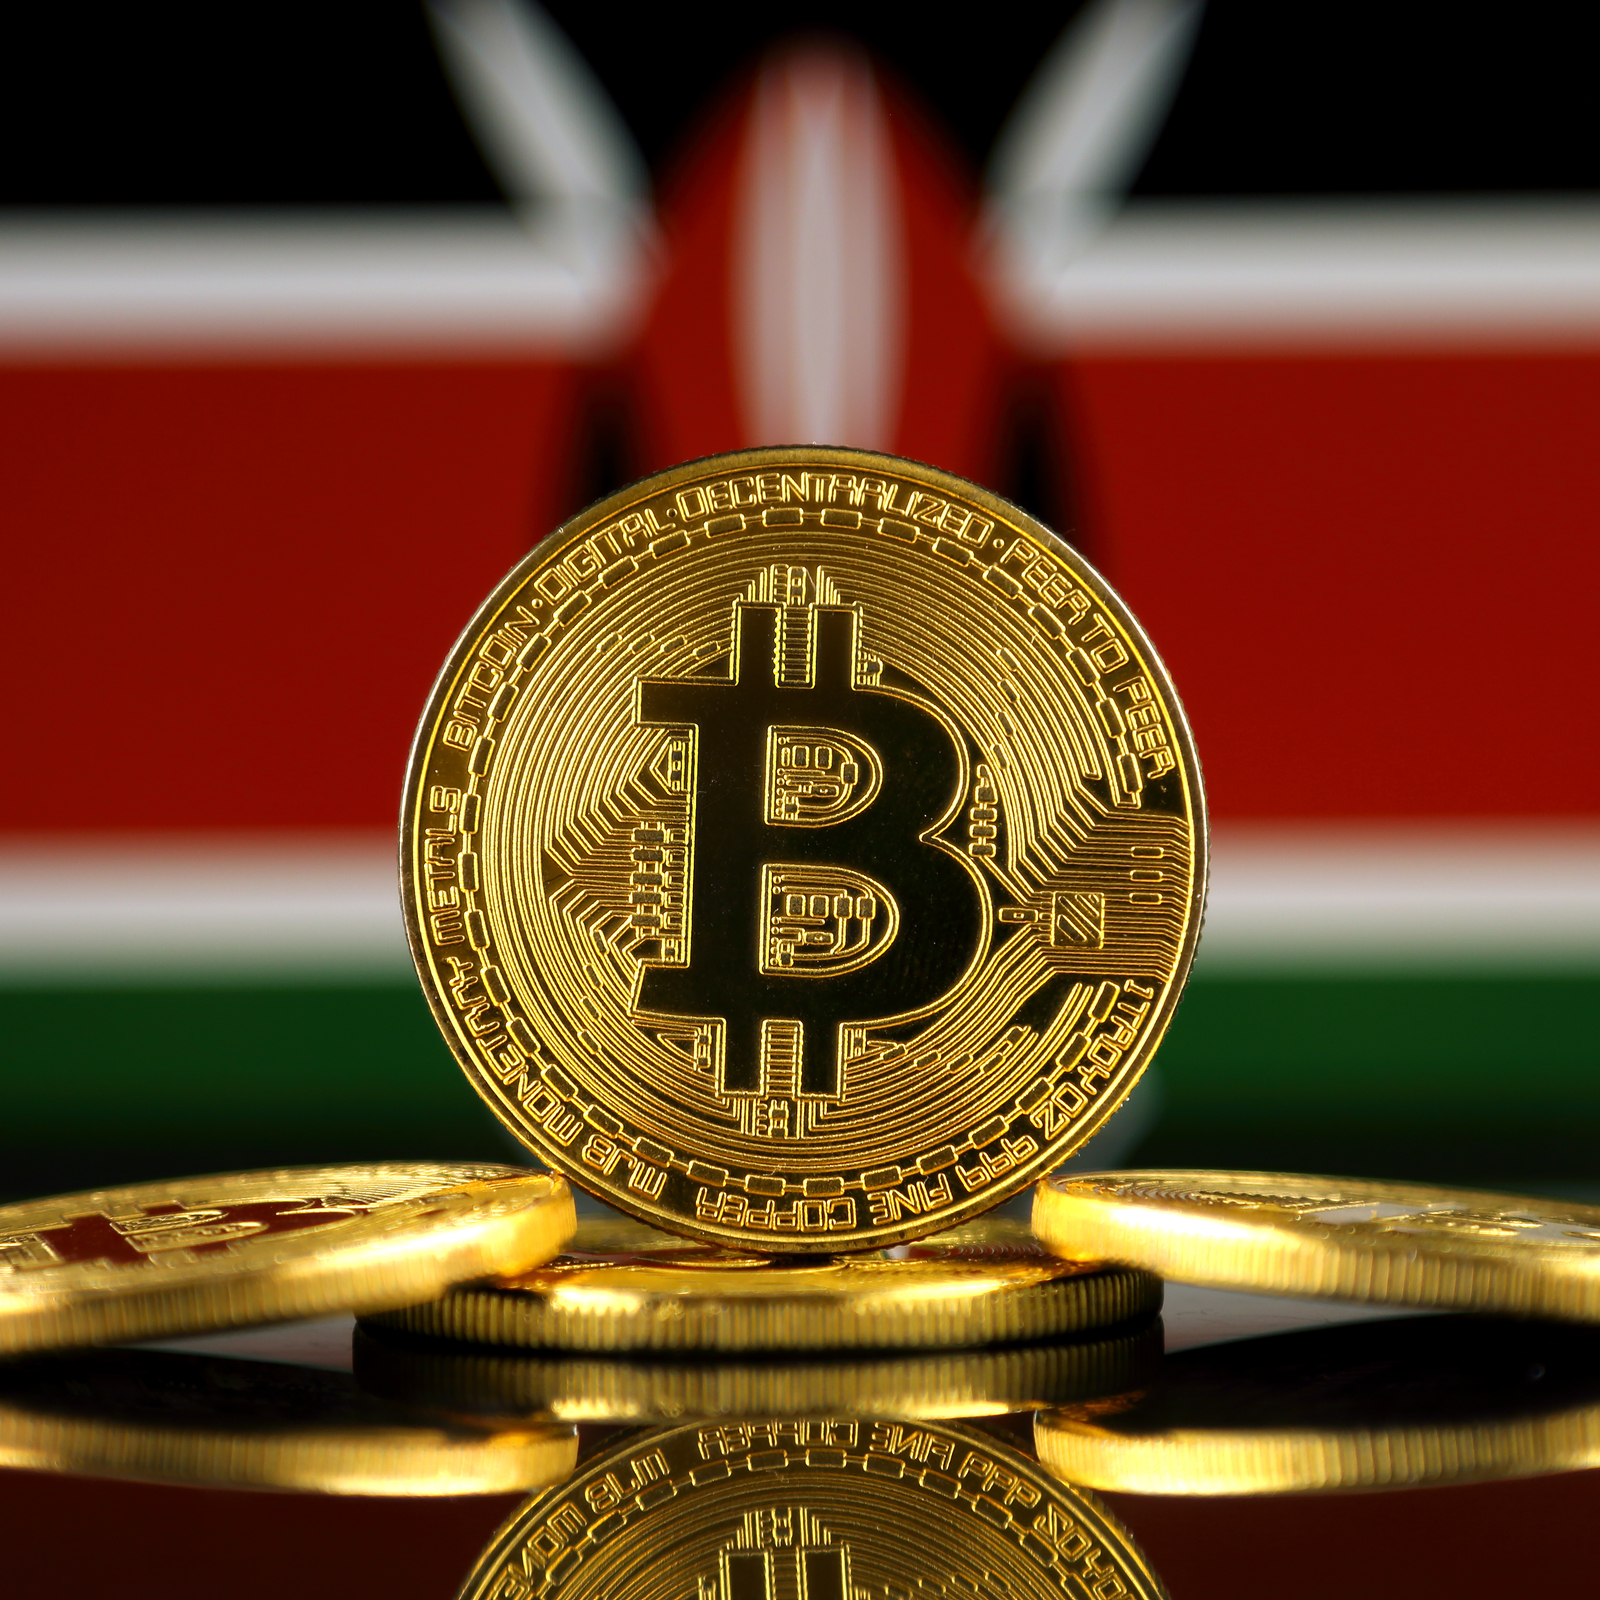 Pesamill Africa Launches as Kenya's Latest Exchange, Offers P2P And Centralised Trading